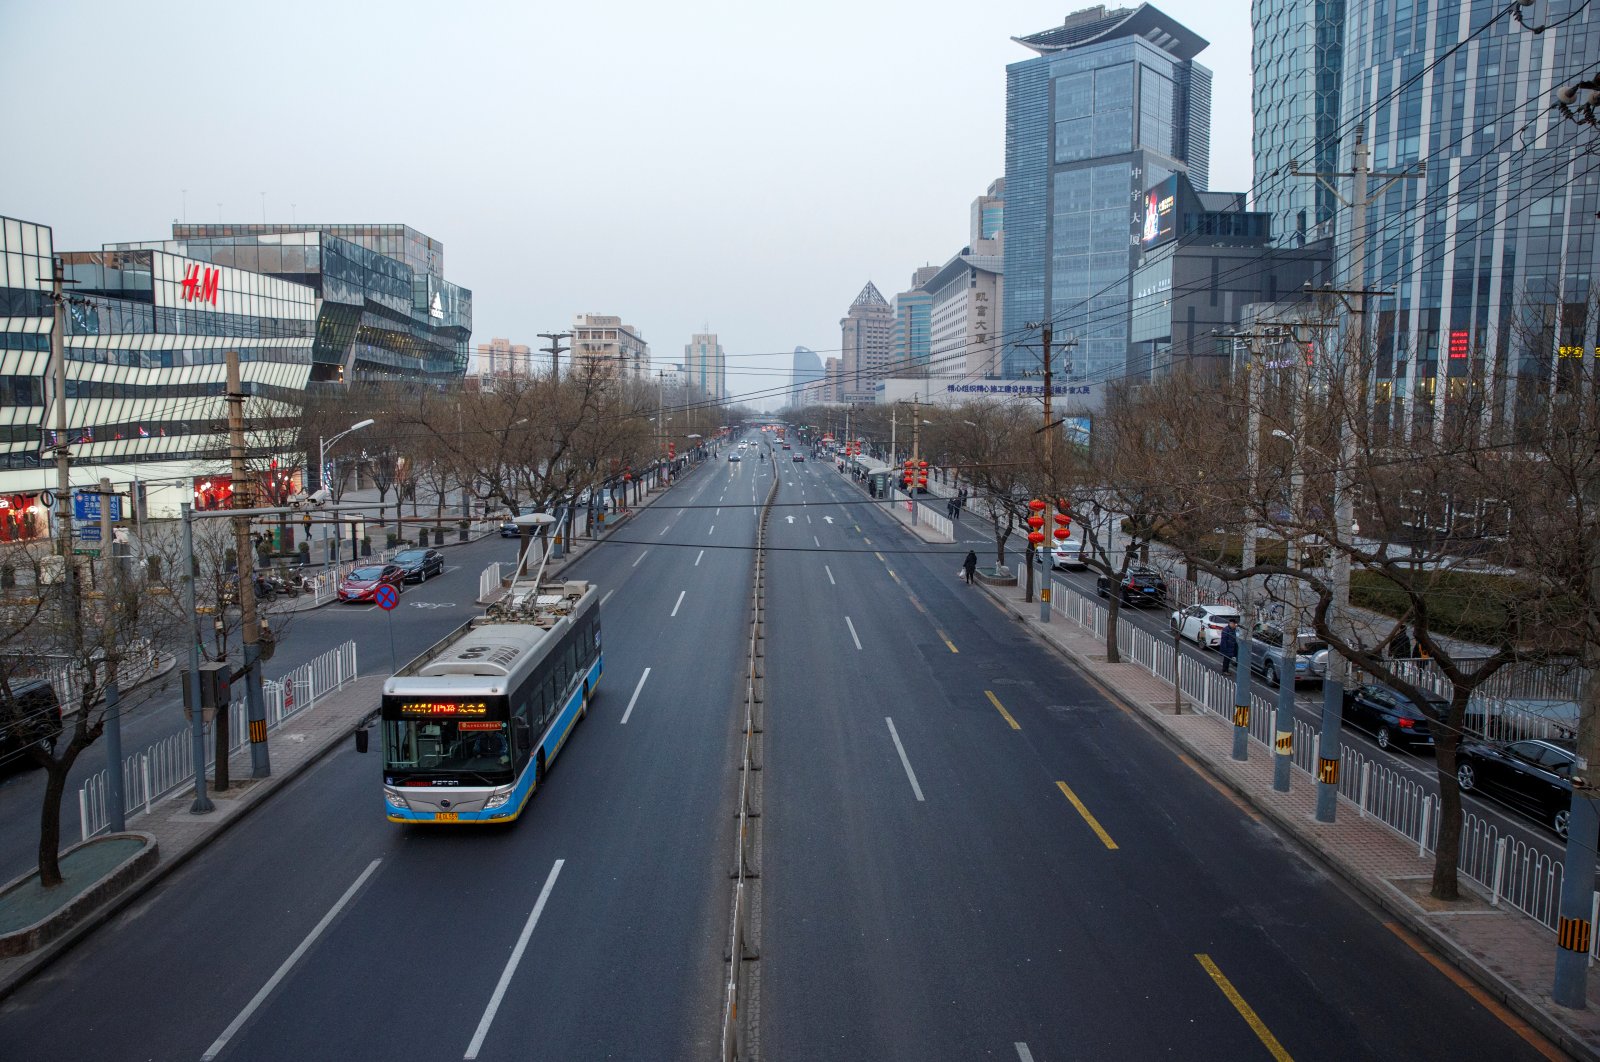 An electric bus goes on a usually busy main road in the Sanlitun shopping district in Beijing, China, Feb. 4, 2019. (Reuters Photo)